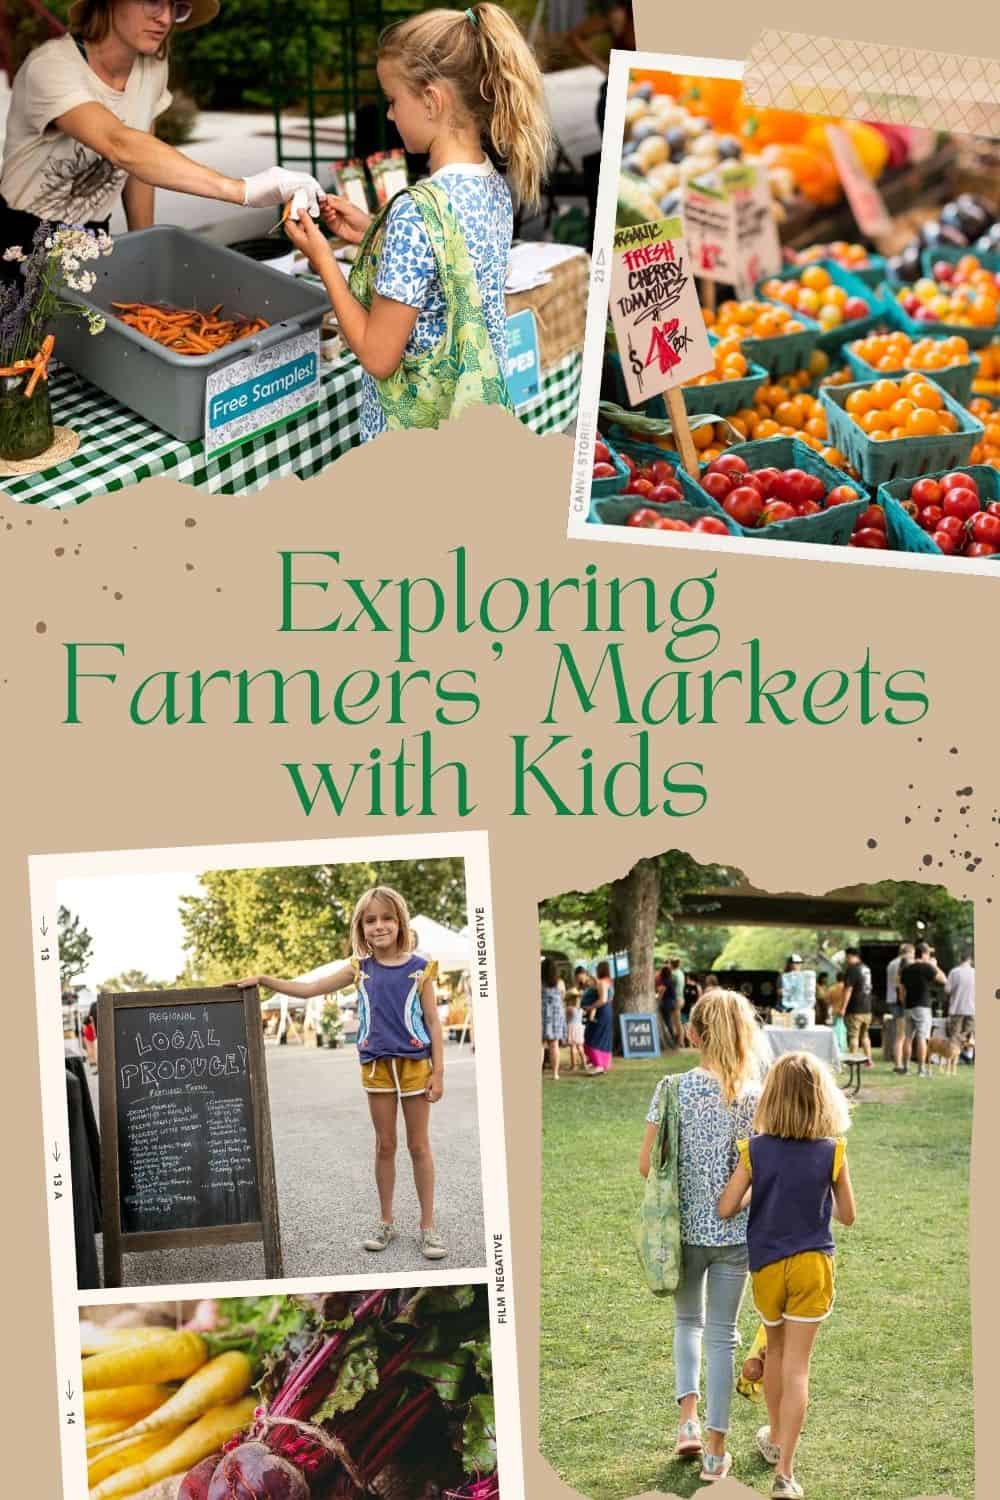 Exploring a farmers' market with kids - tips and advice for parents